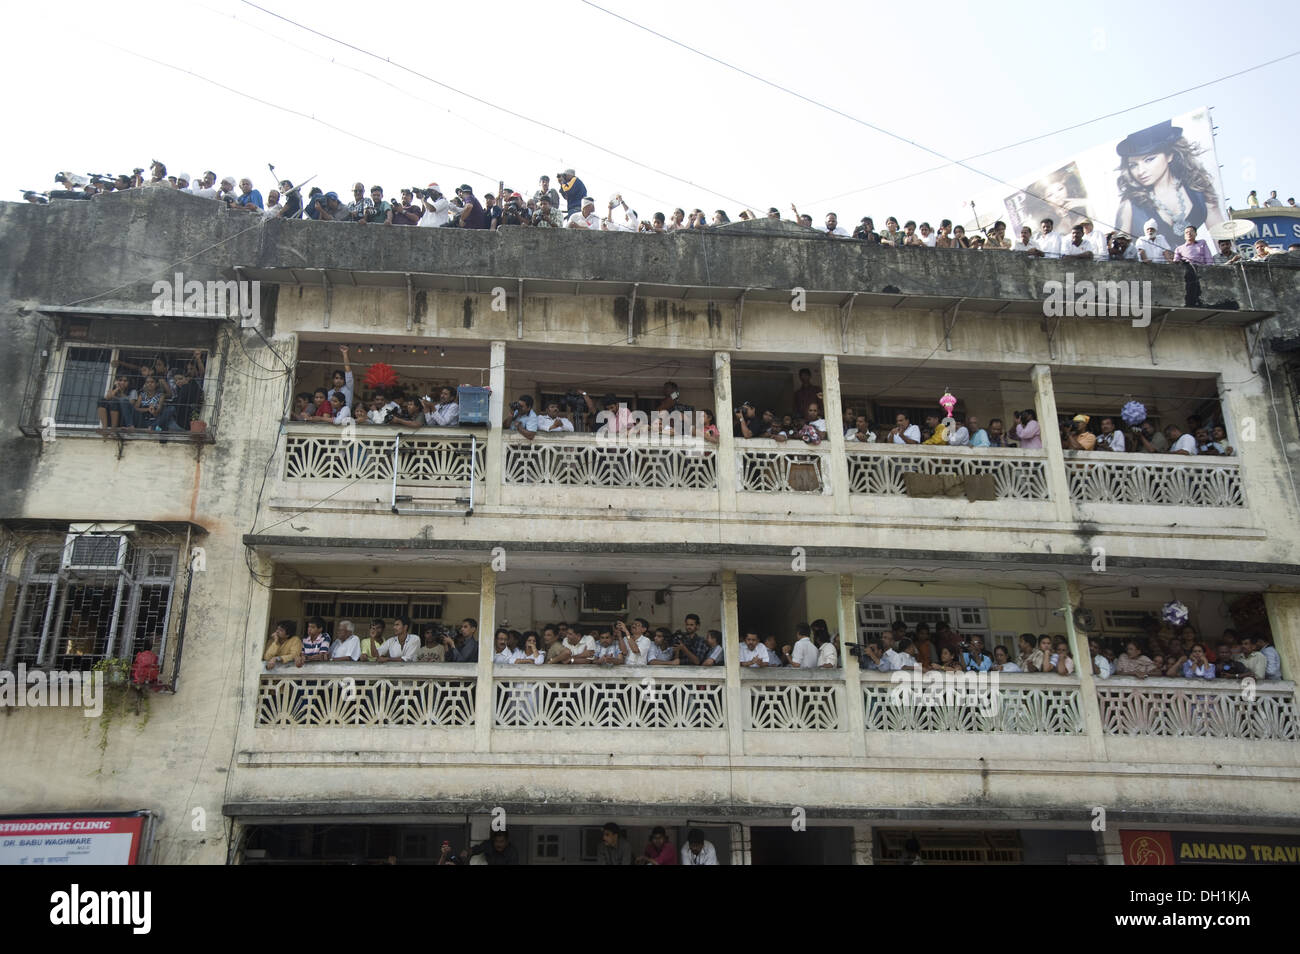 crowd of people in building to see funeral procession of Shiv Sena Chief Bal Thackeray mumbai maharashtra india asia Stock Photo